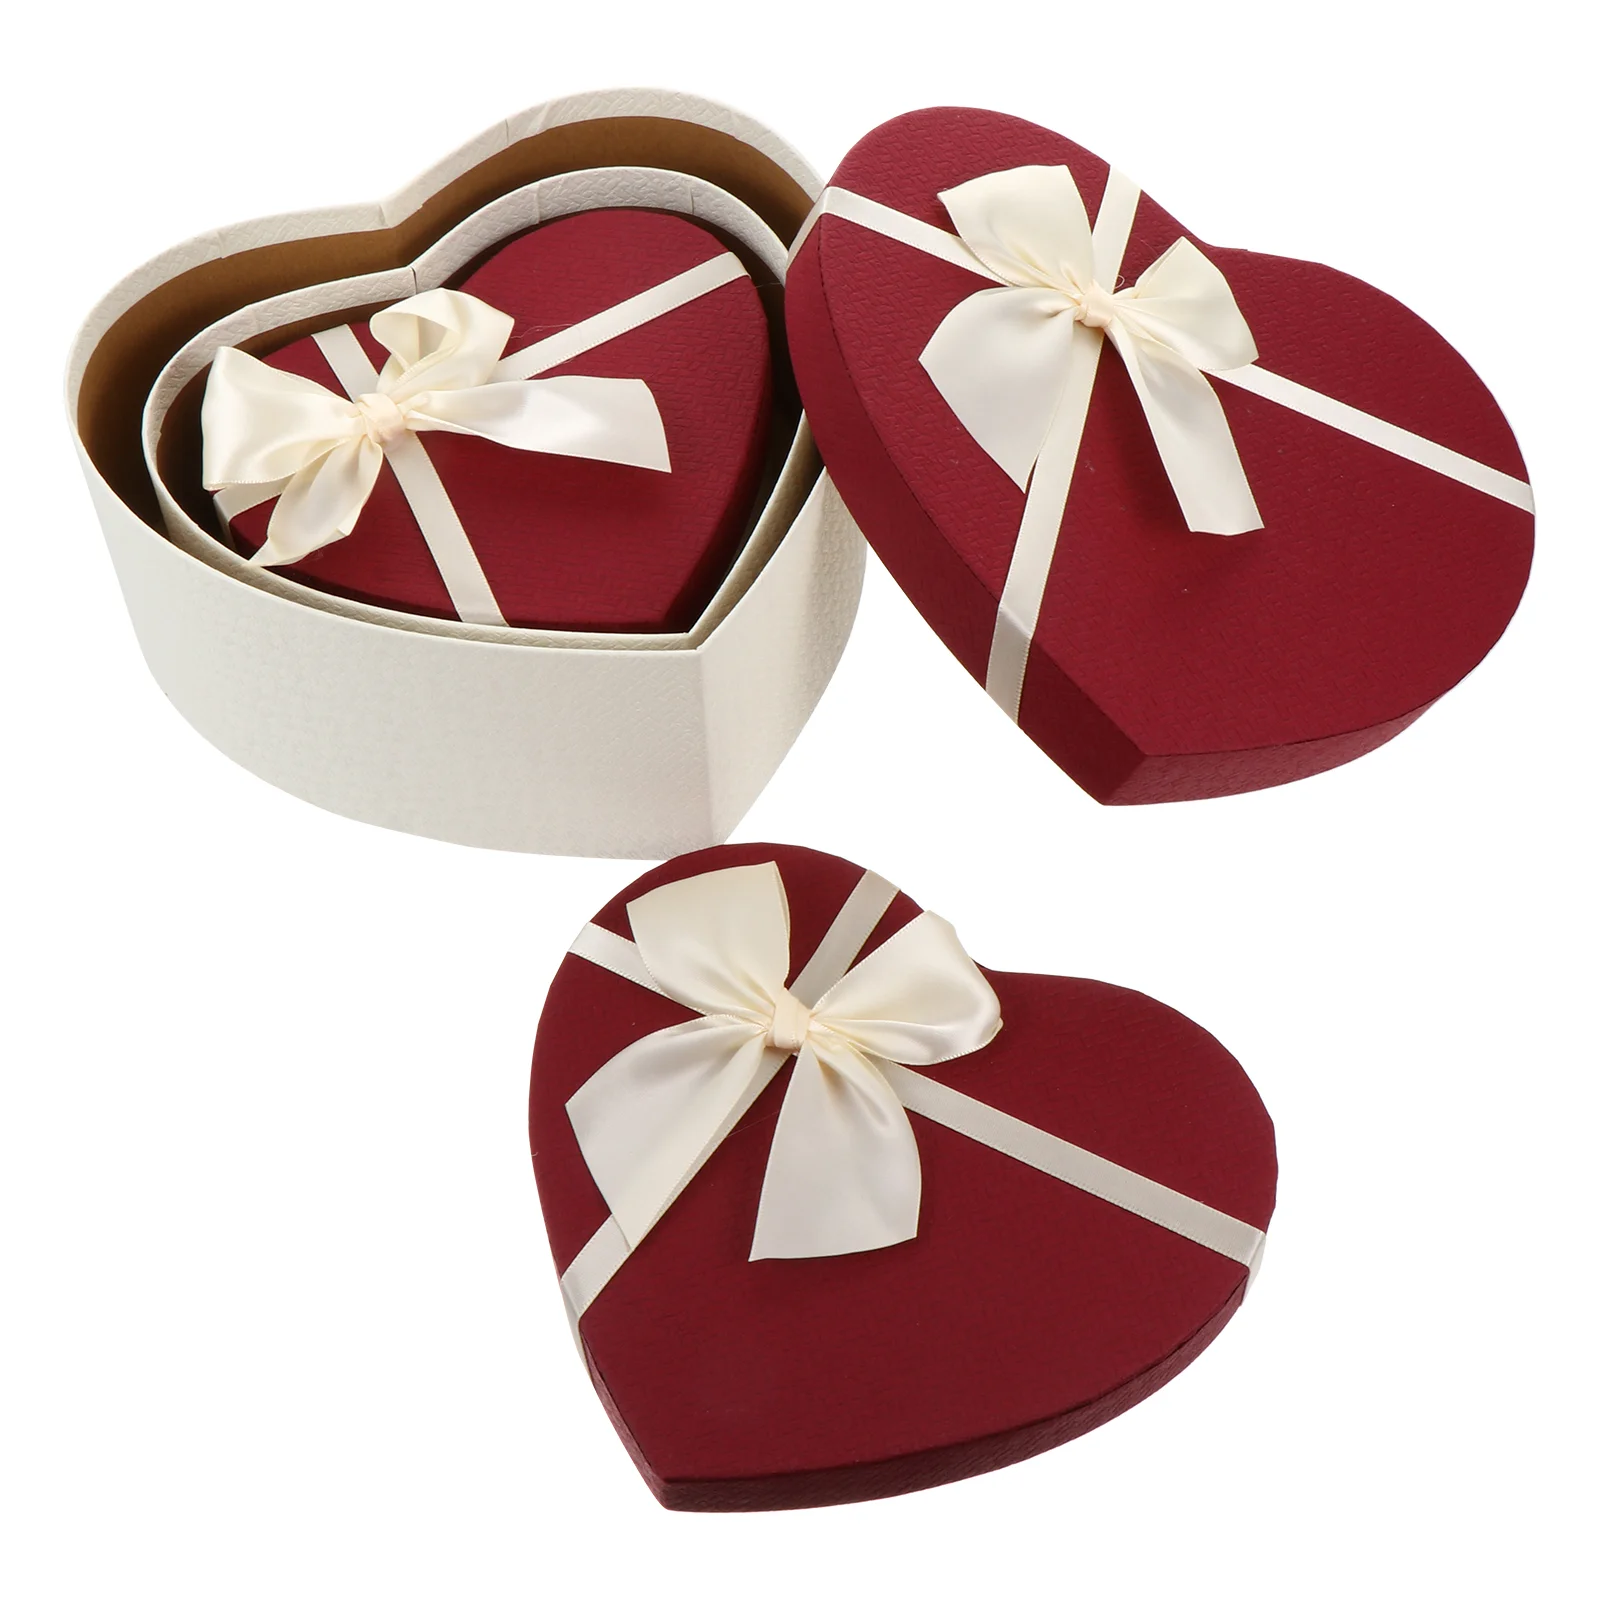 

3pcs Cardboard Jewelry Case Jewelry Paper Box Wedding Treat Boxes Wedding Party Favor Box Gift Packing Box